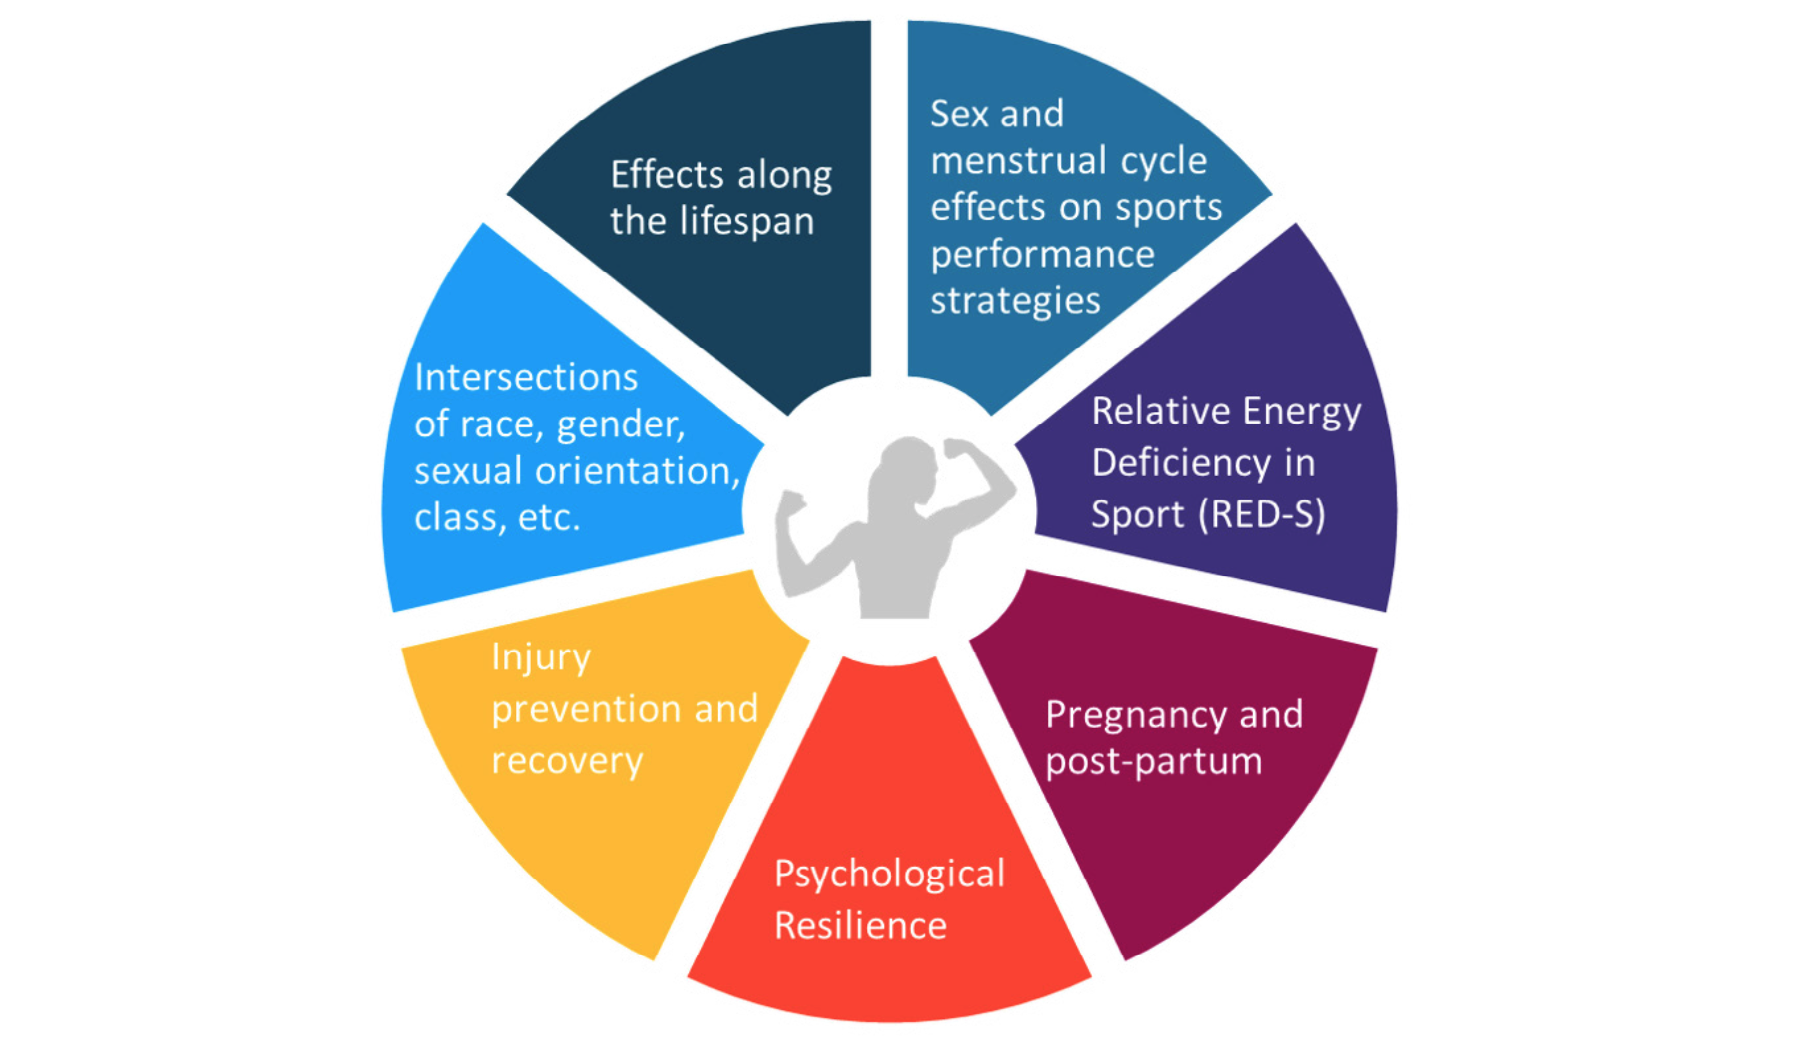 Female Athlete Program’s Approach to Clinical Questions